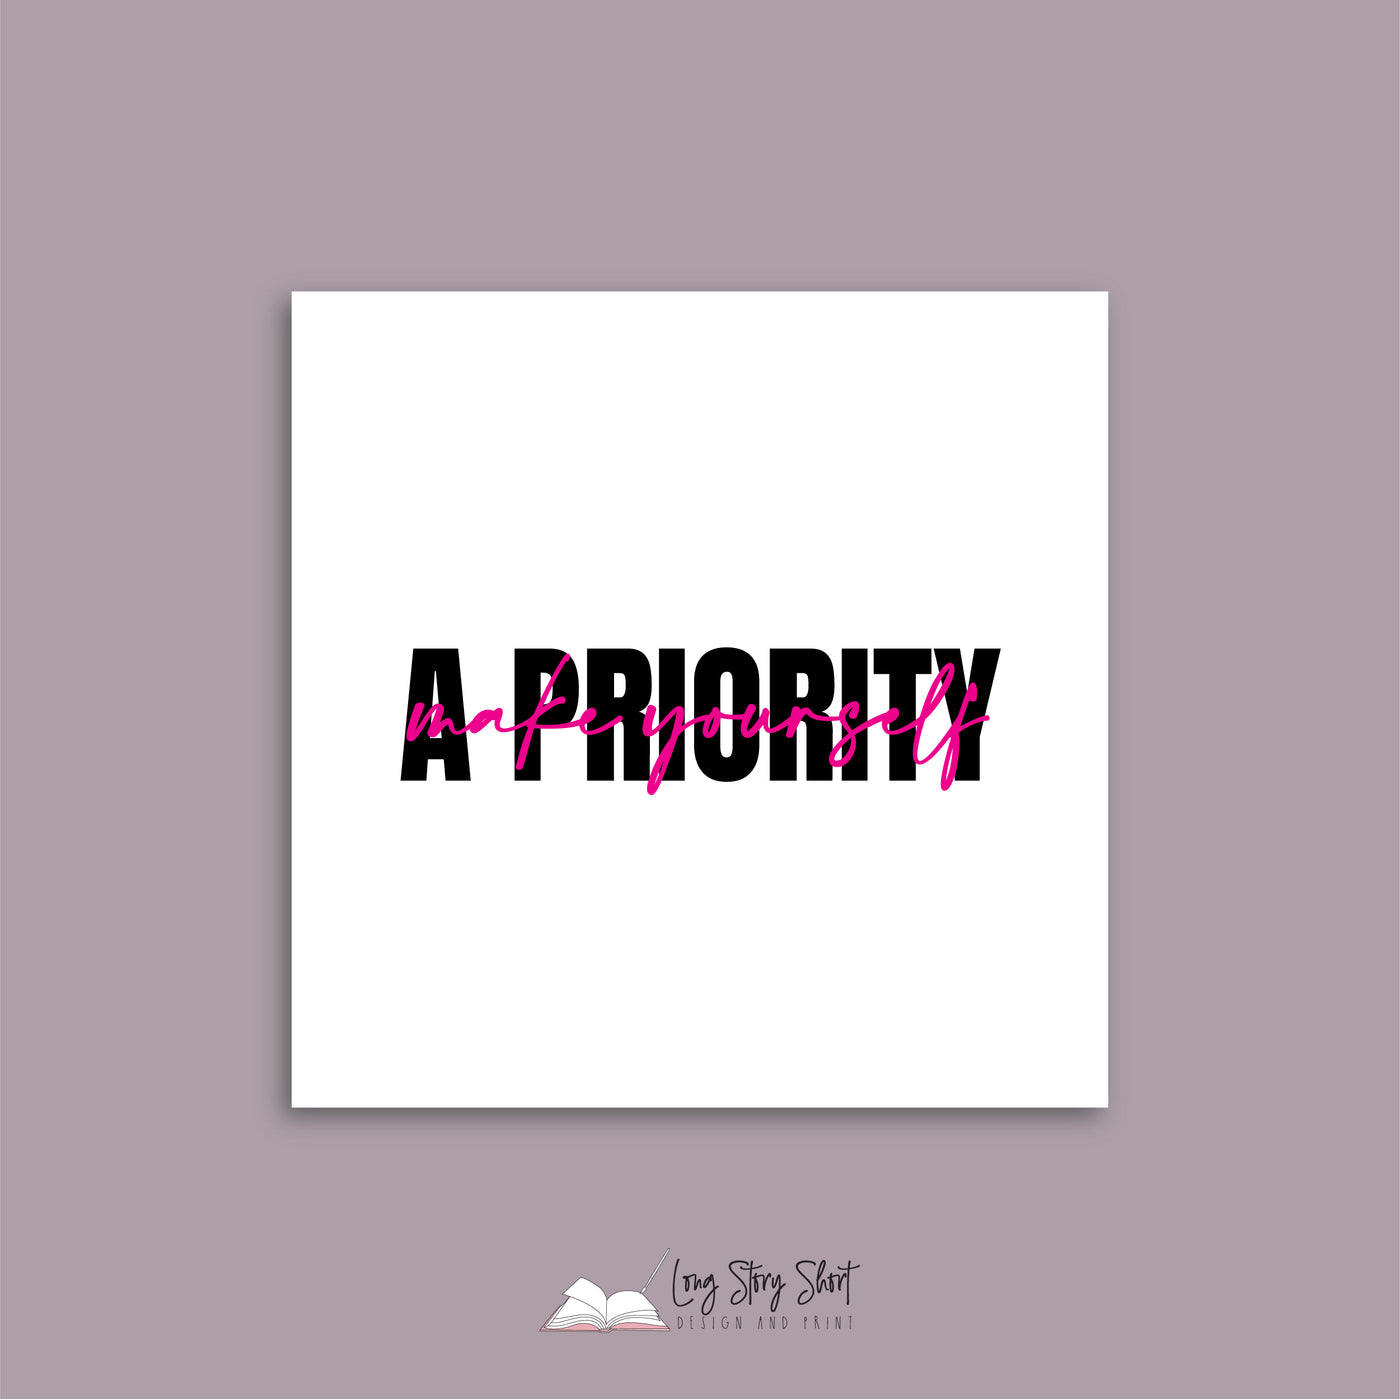 Make yourself a priority Vinyl Label Pack (Black, White, Foil options)